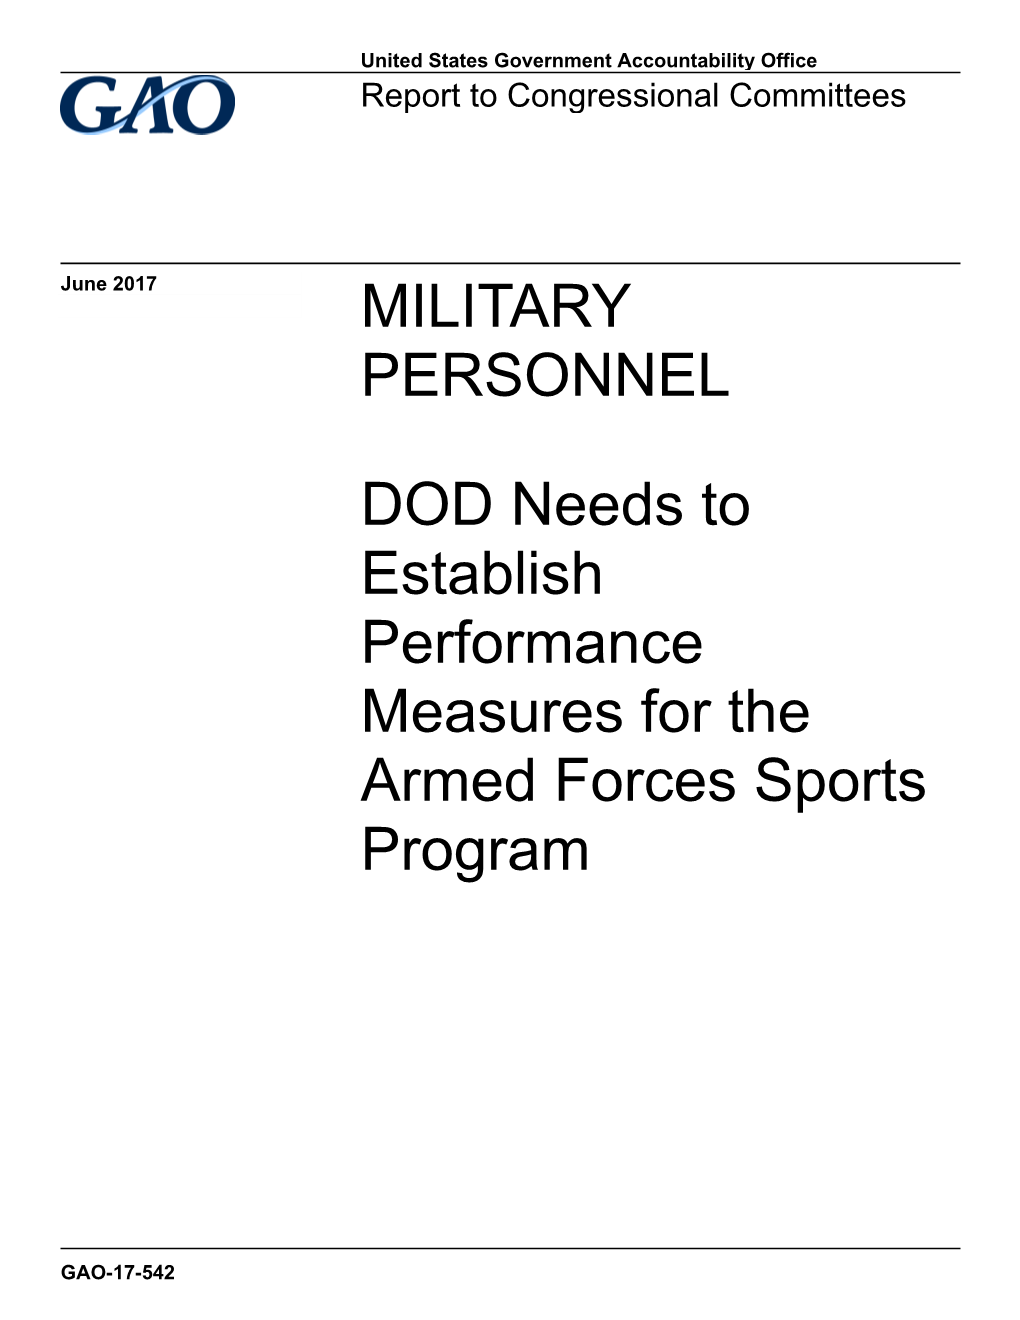 GAO-17-542, MILITARY PERSONNEL: DOD Needs to Establish